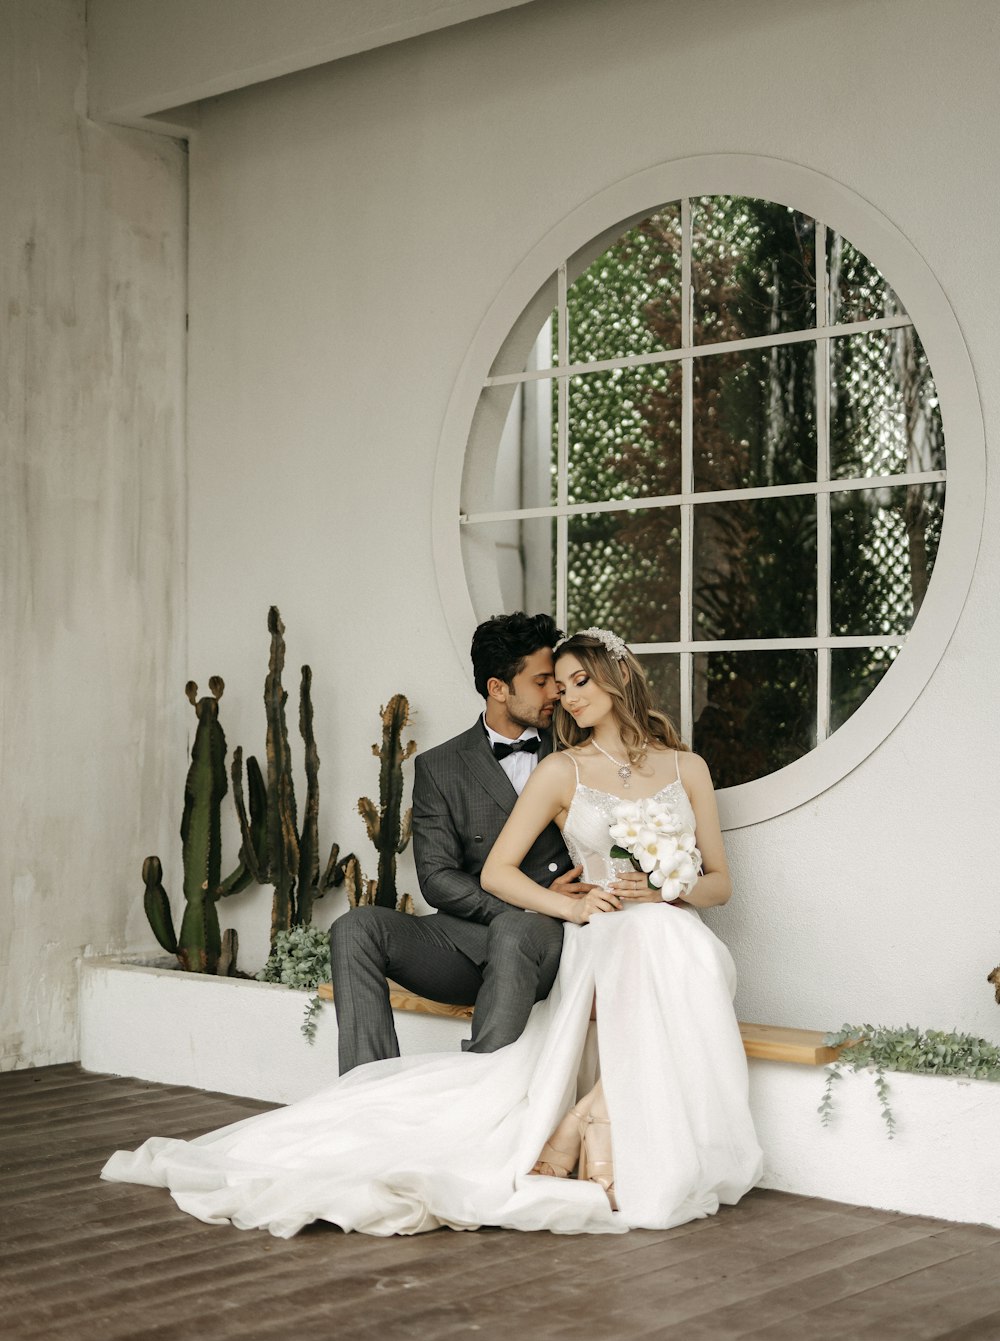 a bride and groom sitting on a bench in front of a circular window